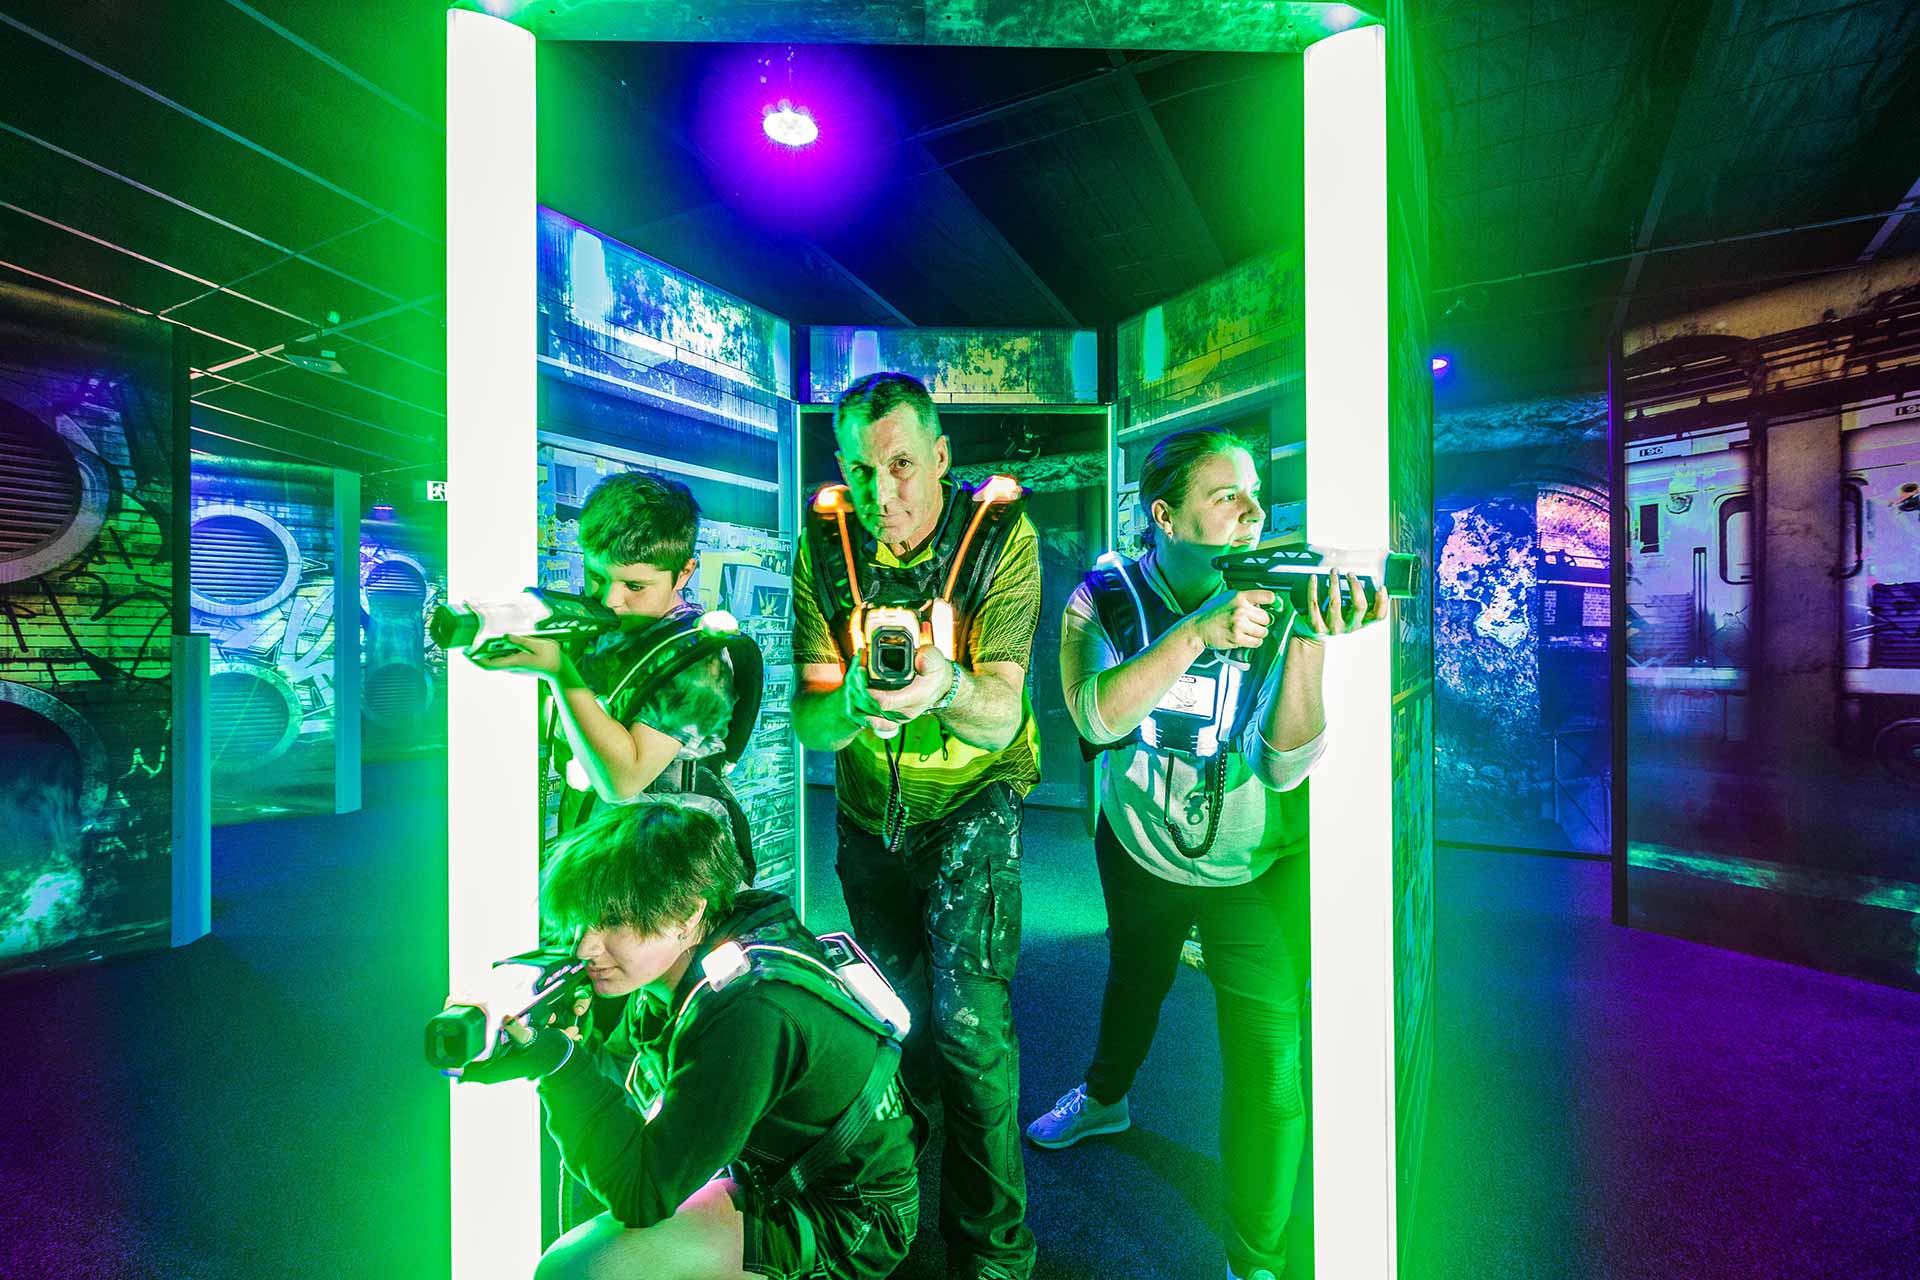 How Much Does It Cost To Play Laser Tag?